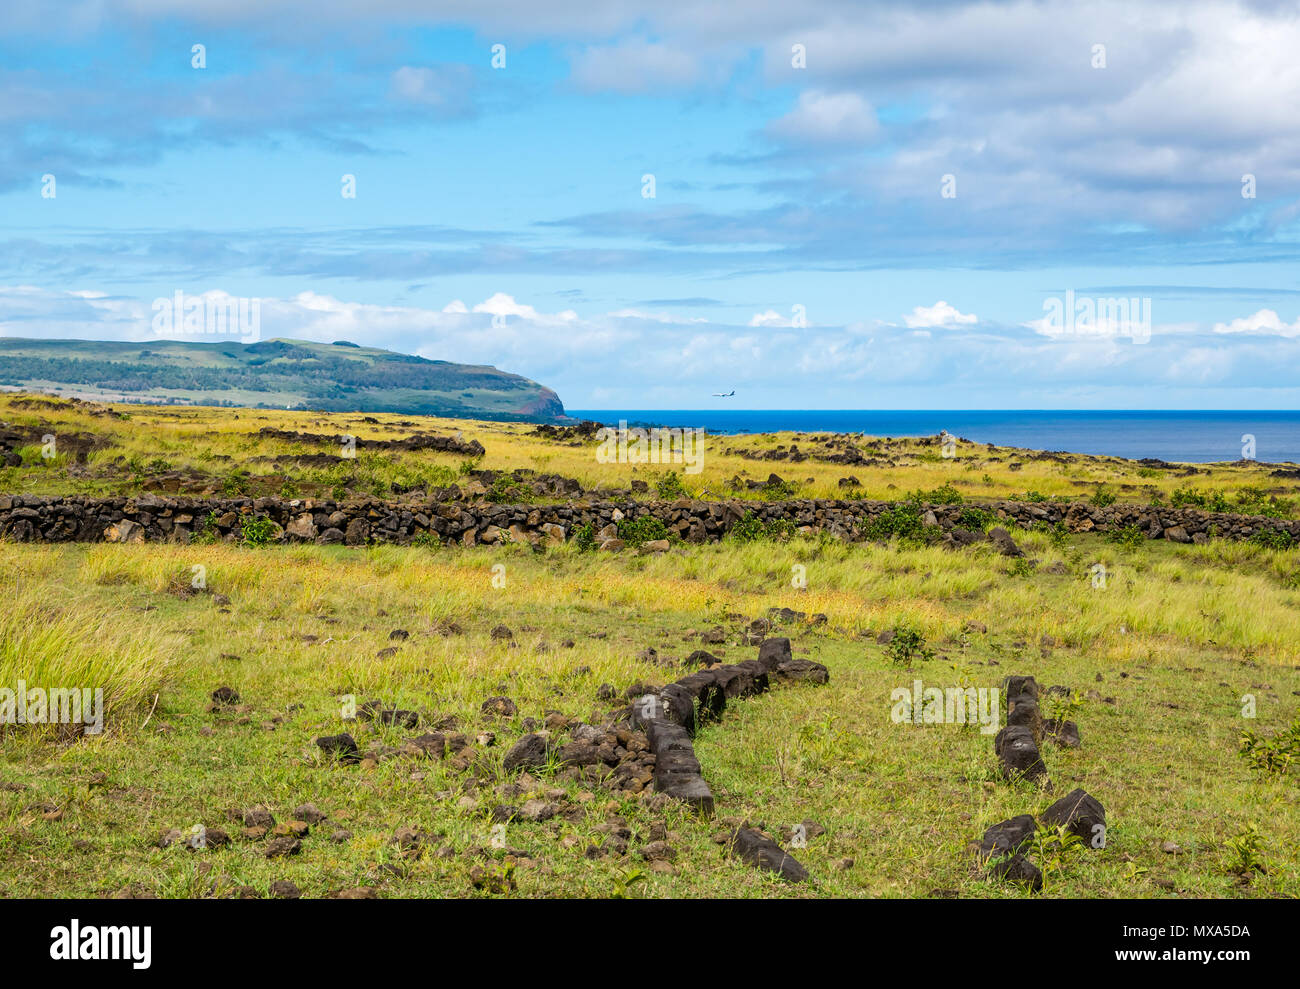 Outline remains of traditional boat shaped village house called Hare Peanga,Te Peu, Easter Island, Rapa Nui, Chile Stock Photo